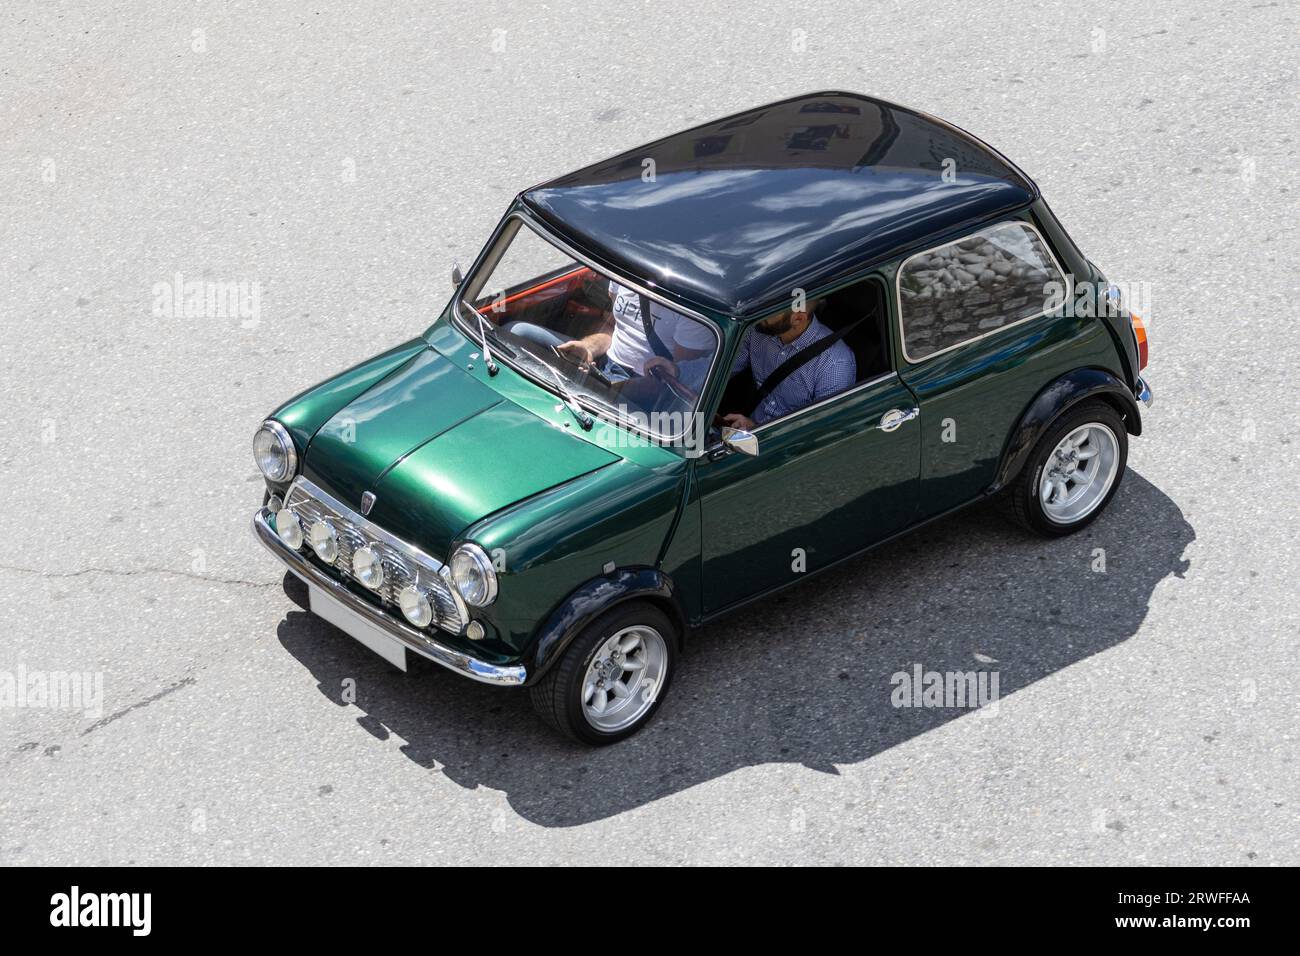 Galicia, Spain; august 27, 2023: High angle view of a Morris Mini Cooper classic car driving on a road Stock Photo